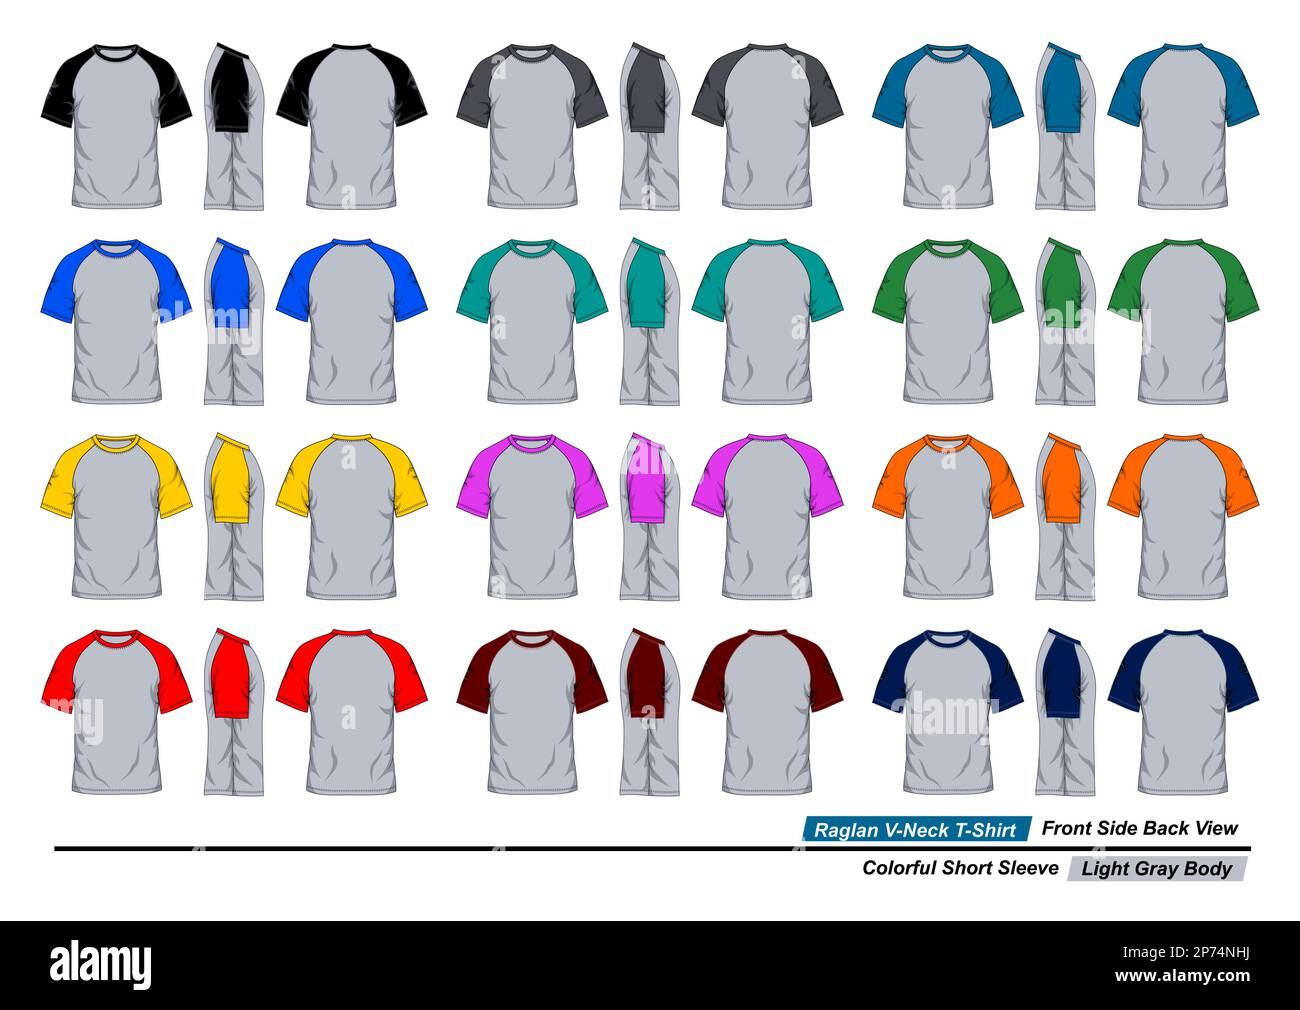 Raglan round neck t-shirt template, front side and back view, colorful ...